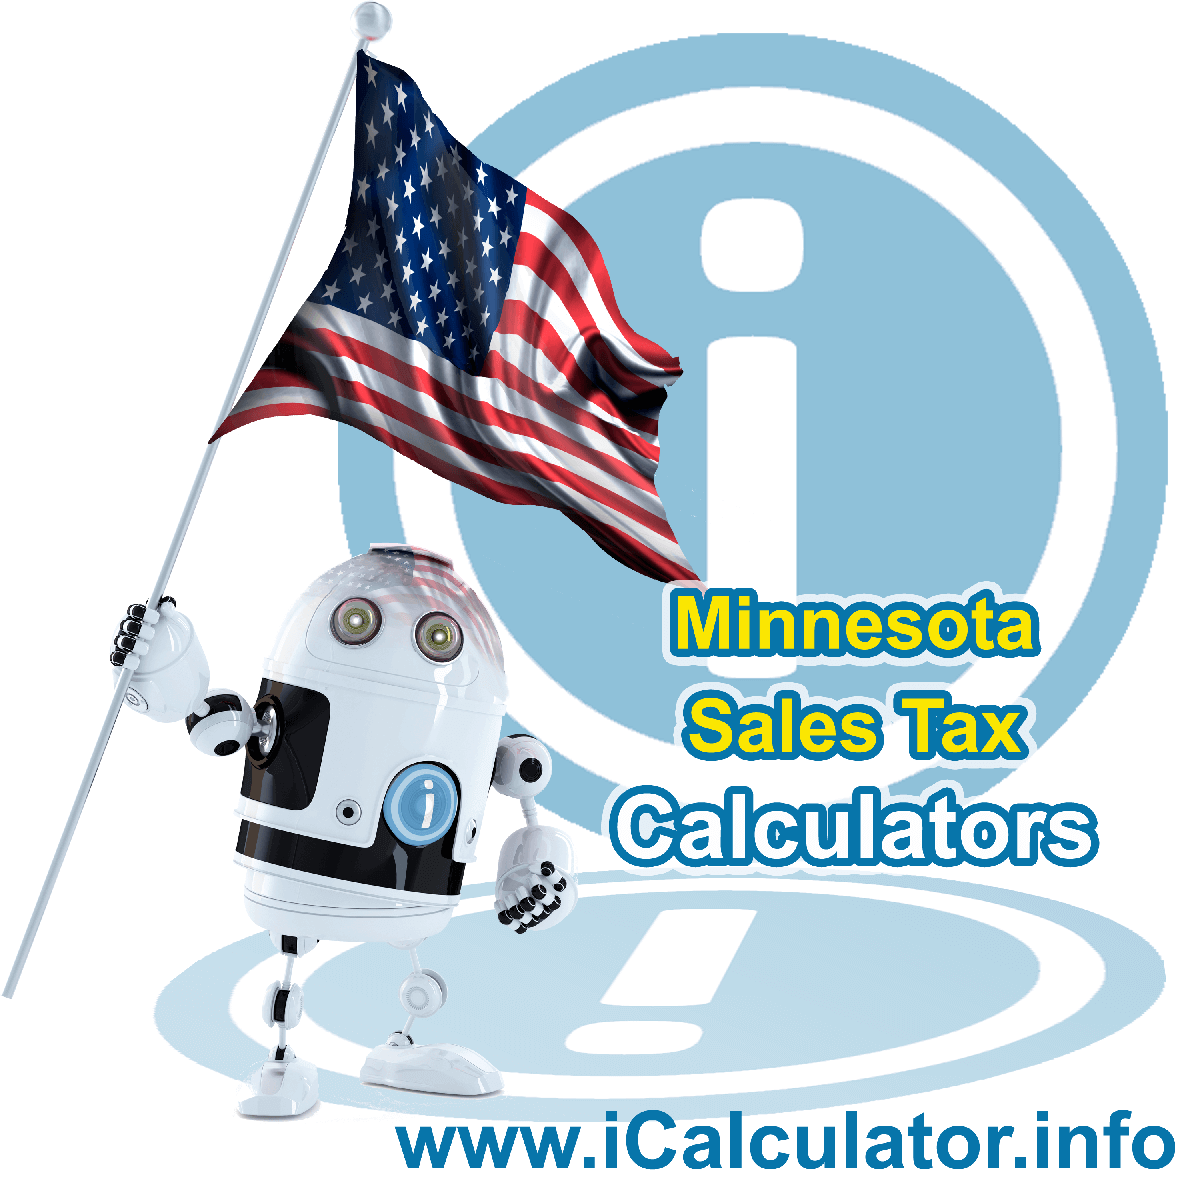 Minnesota Sales Tax Comparison Calculator: This image illustrates a calculator robot comparing sales tax in Minnesota manually using the Minnesota Sales Tax Formula. You can use this information to compare Sales Tax manually or use the Minnesota Sales Tax Comparison Calculator to calculate and compare Minnesota sales tax online.